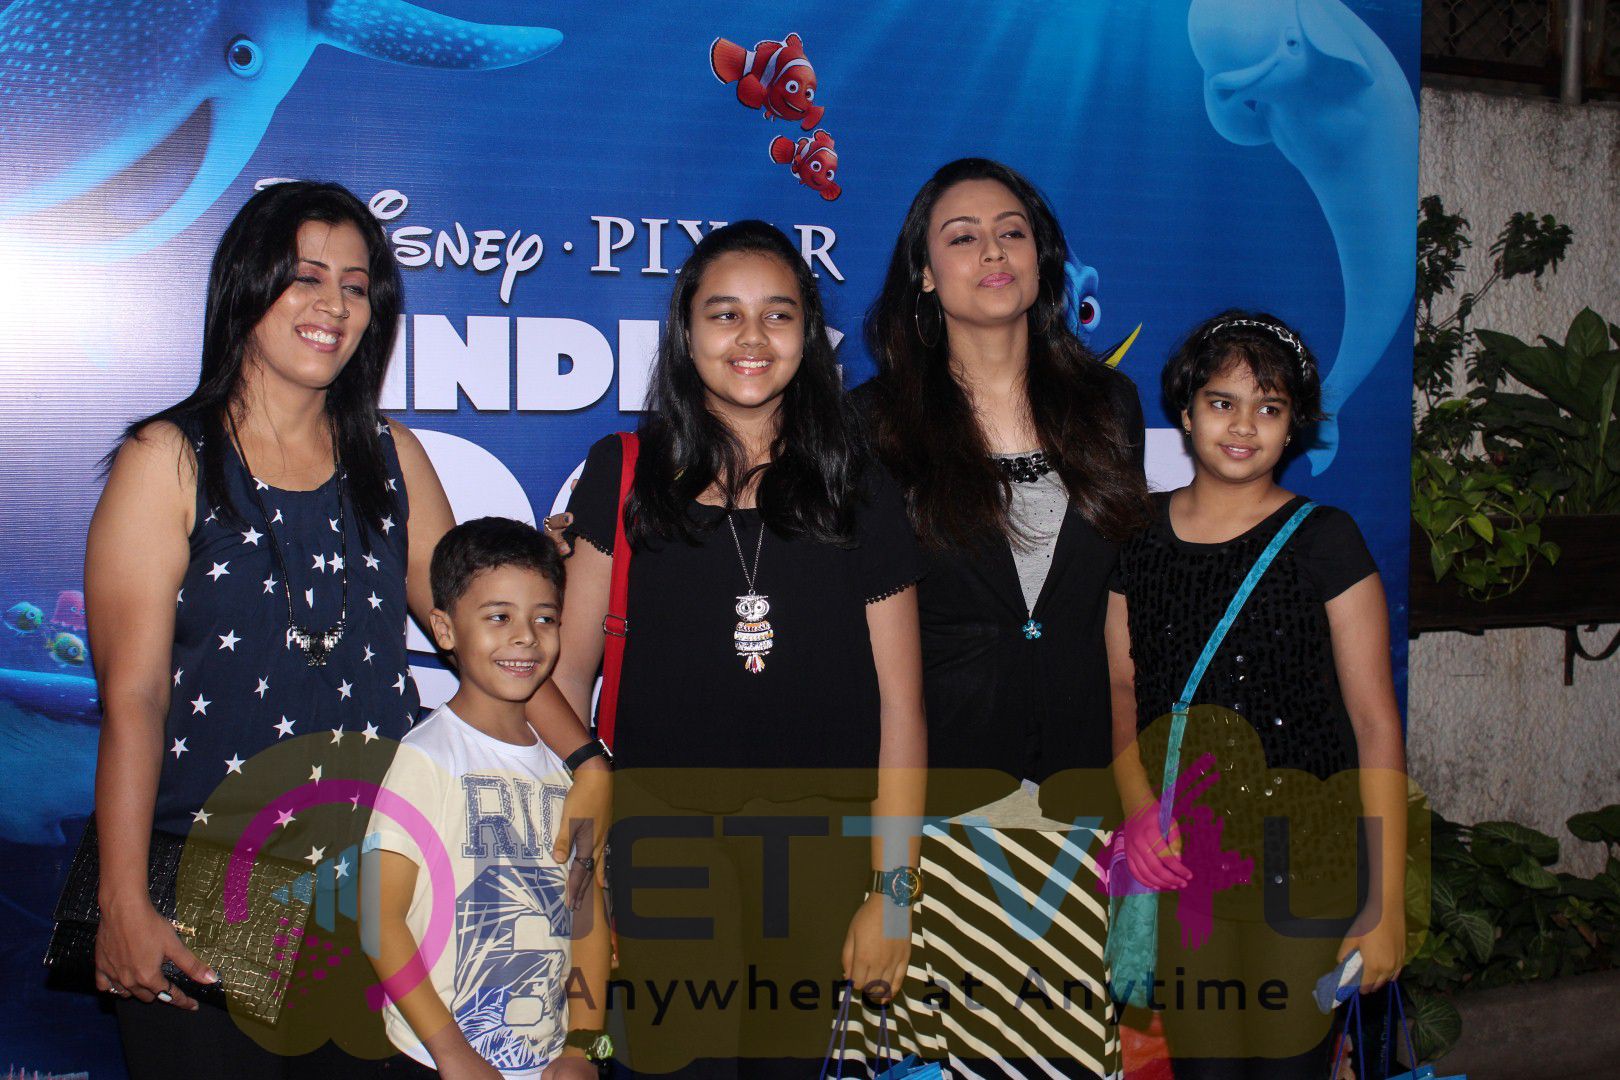 Special Screening Of Disneys Film Finding Dory Exclusive Photos Hindi Gallery